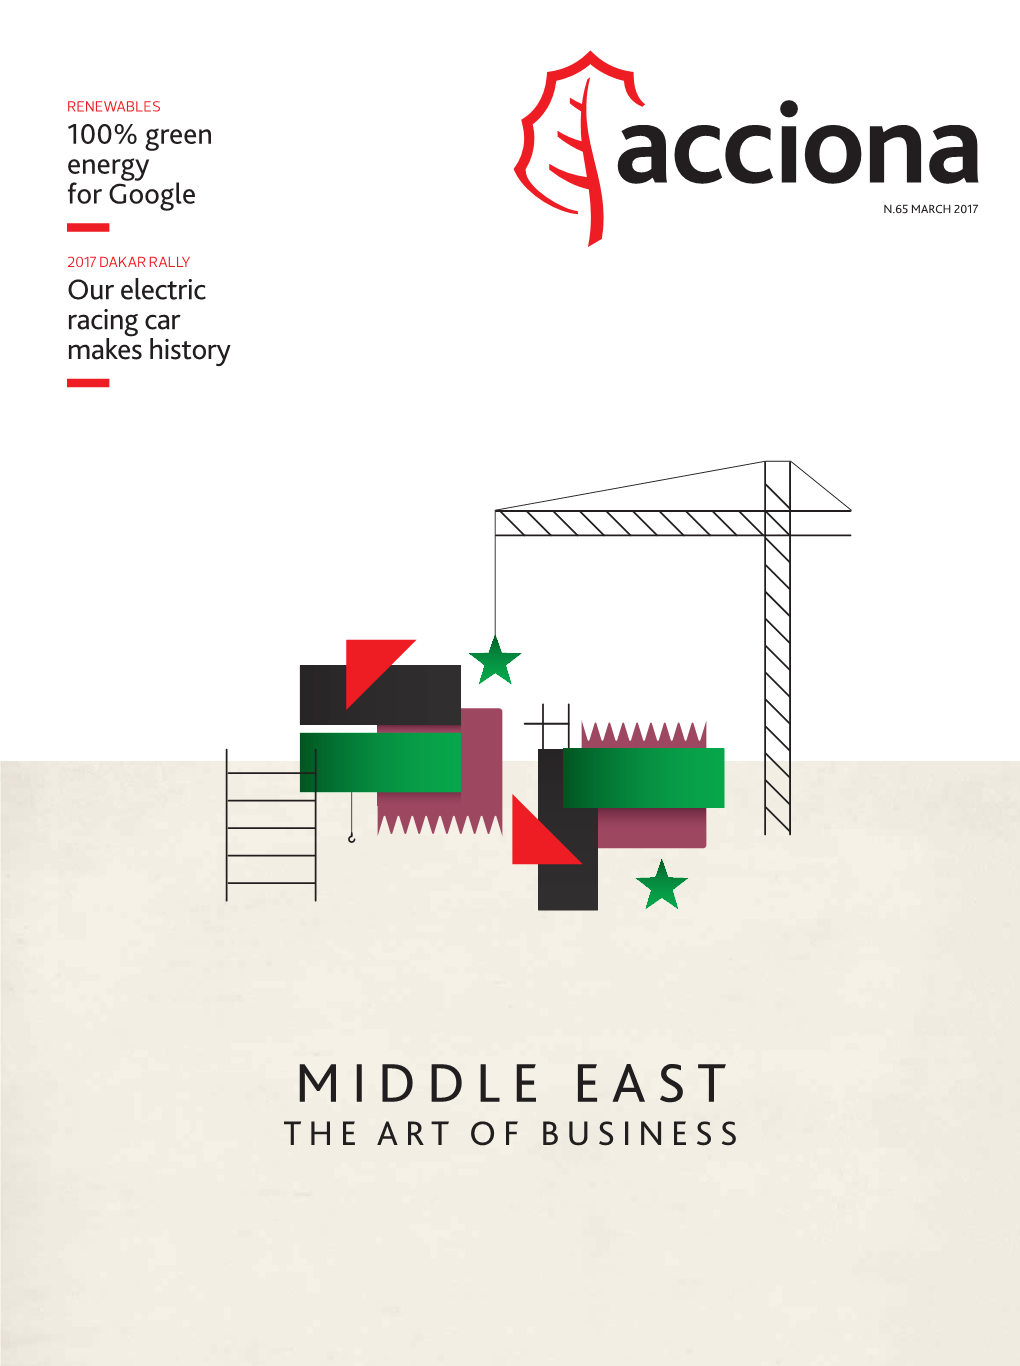 Middle East the Art of Business